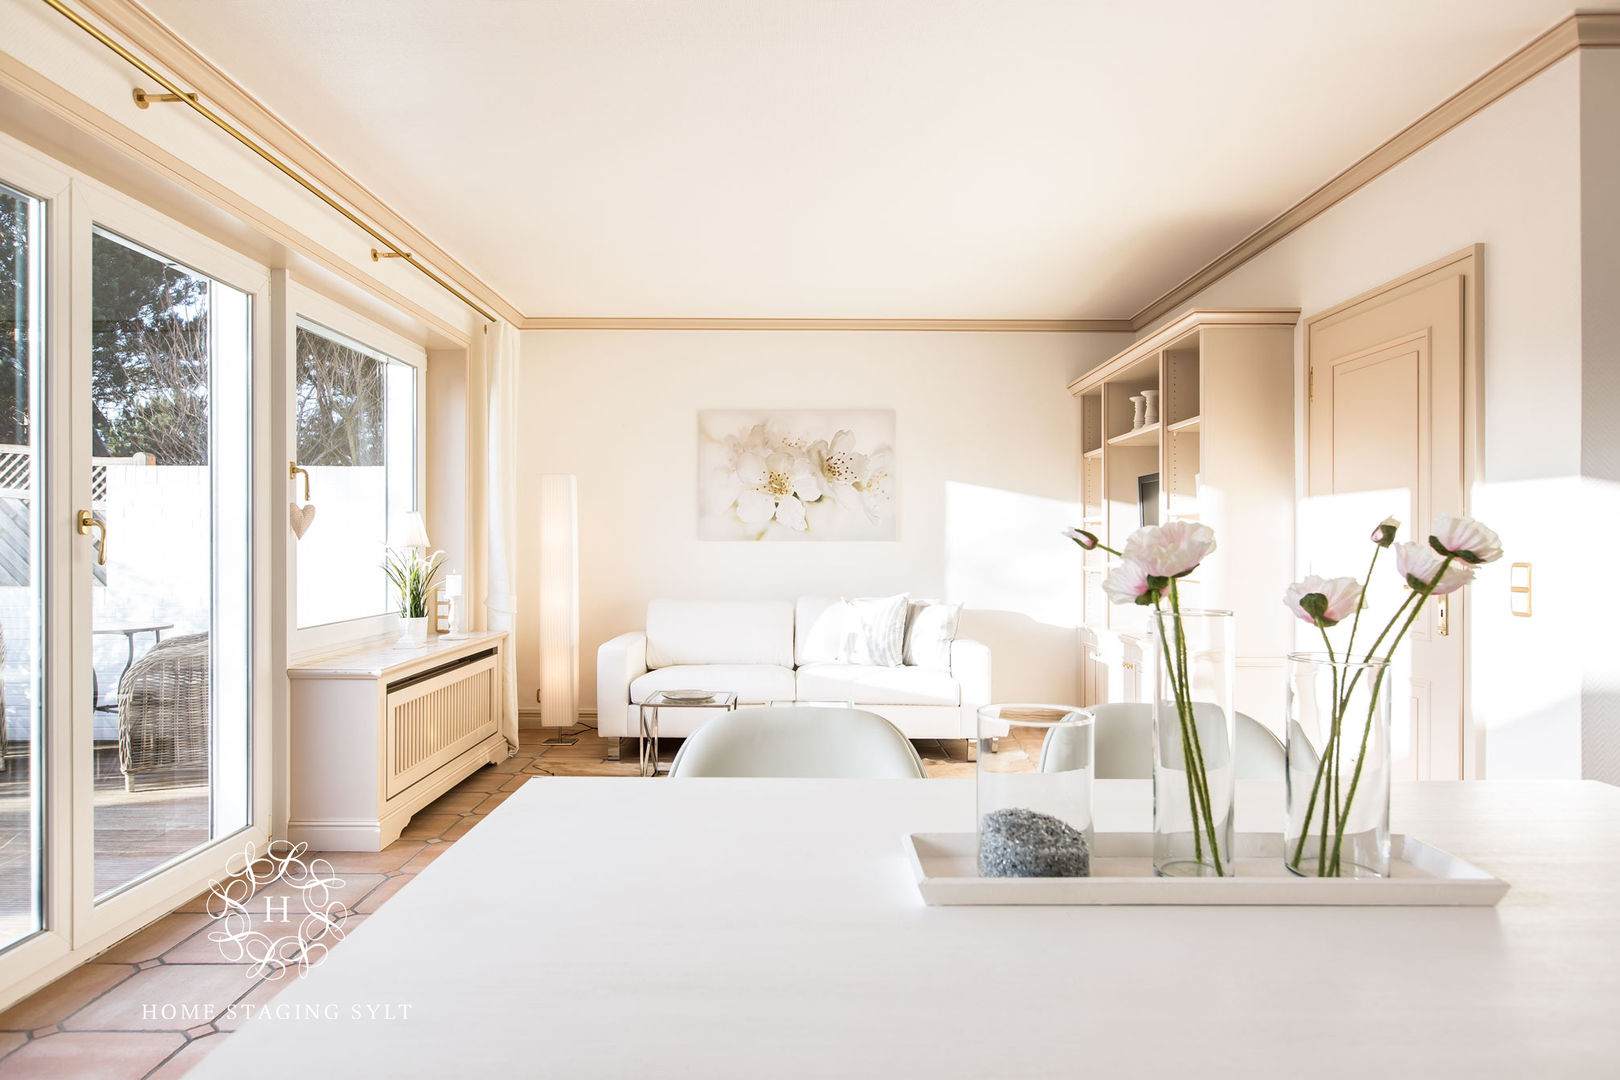 Home Staging Doppelhaus in Westerland/Sylt, Home Staging Sylt GmbH Home Staging Sylt GmbH ห้องนั่งเล่น